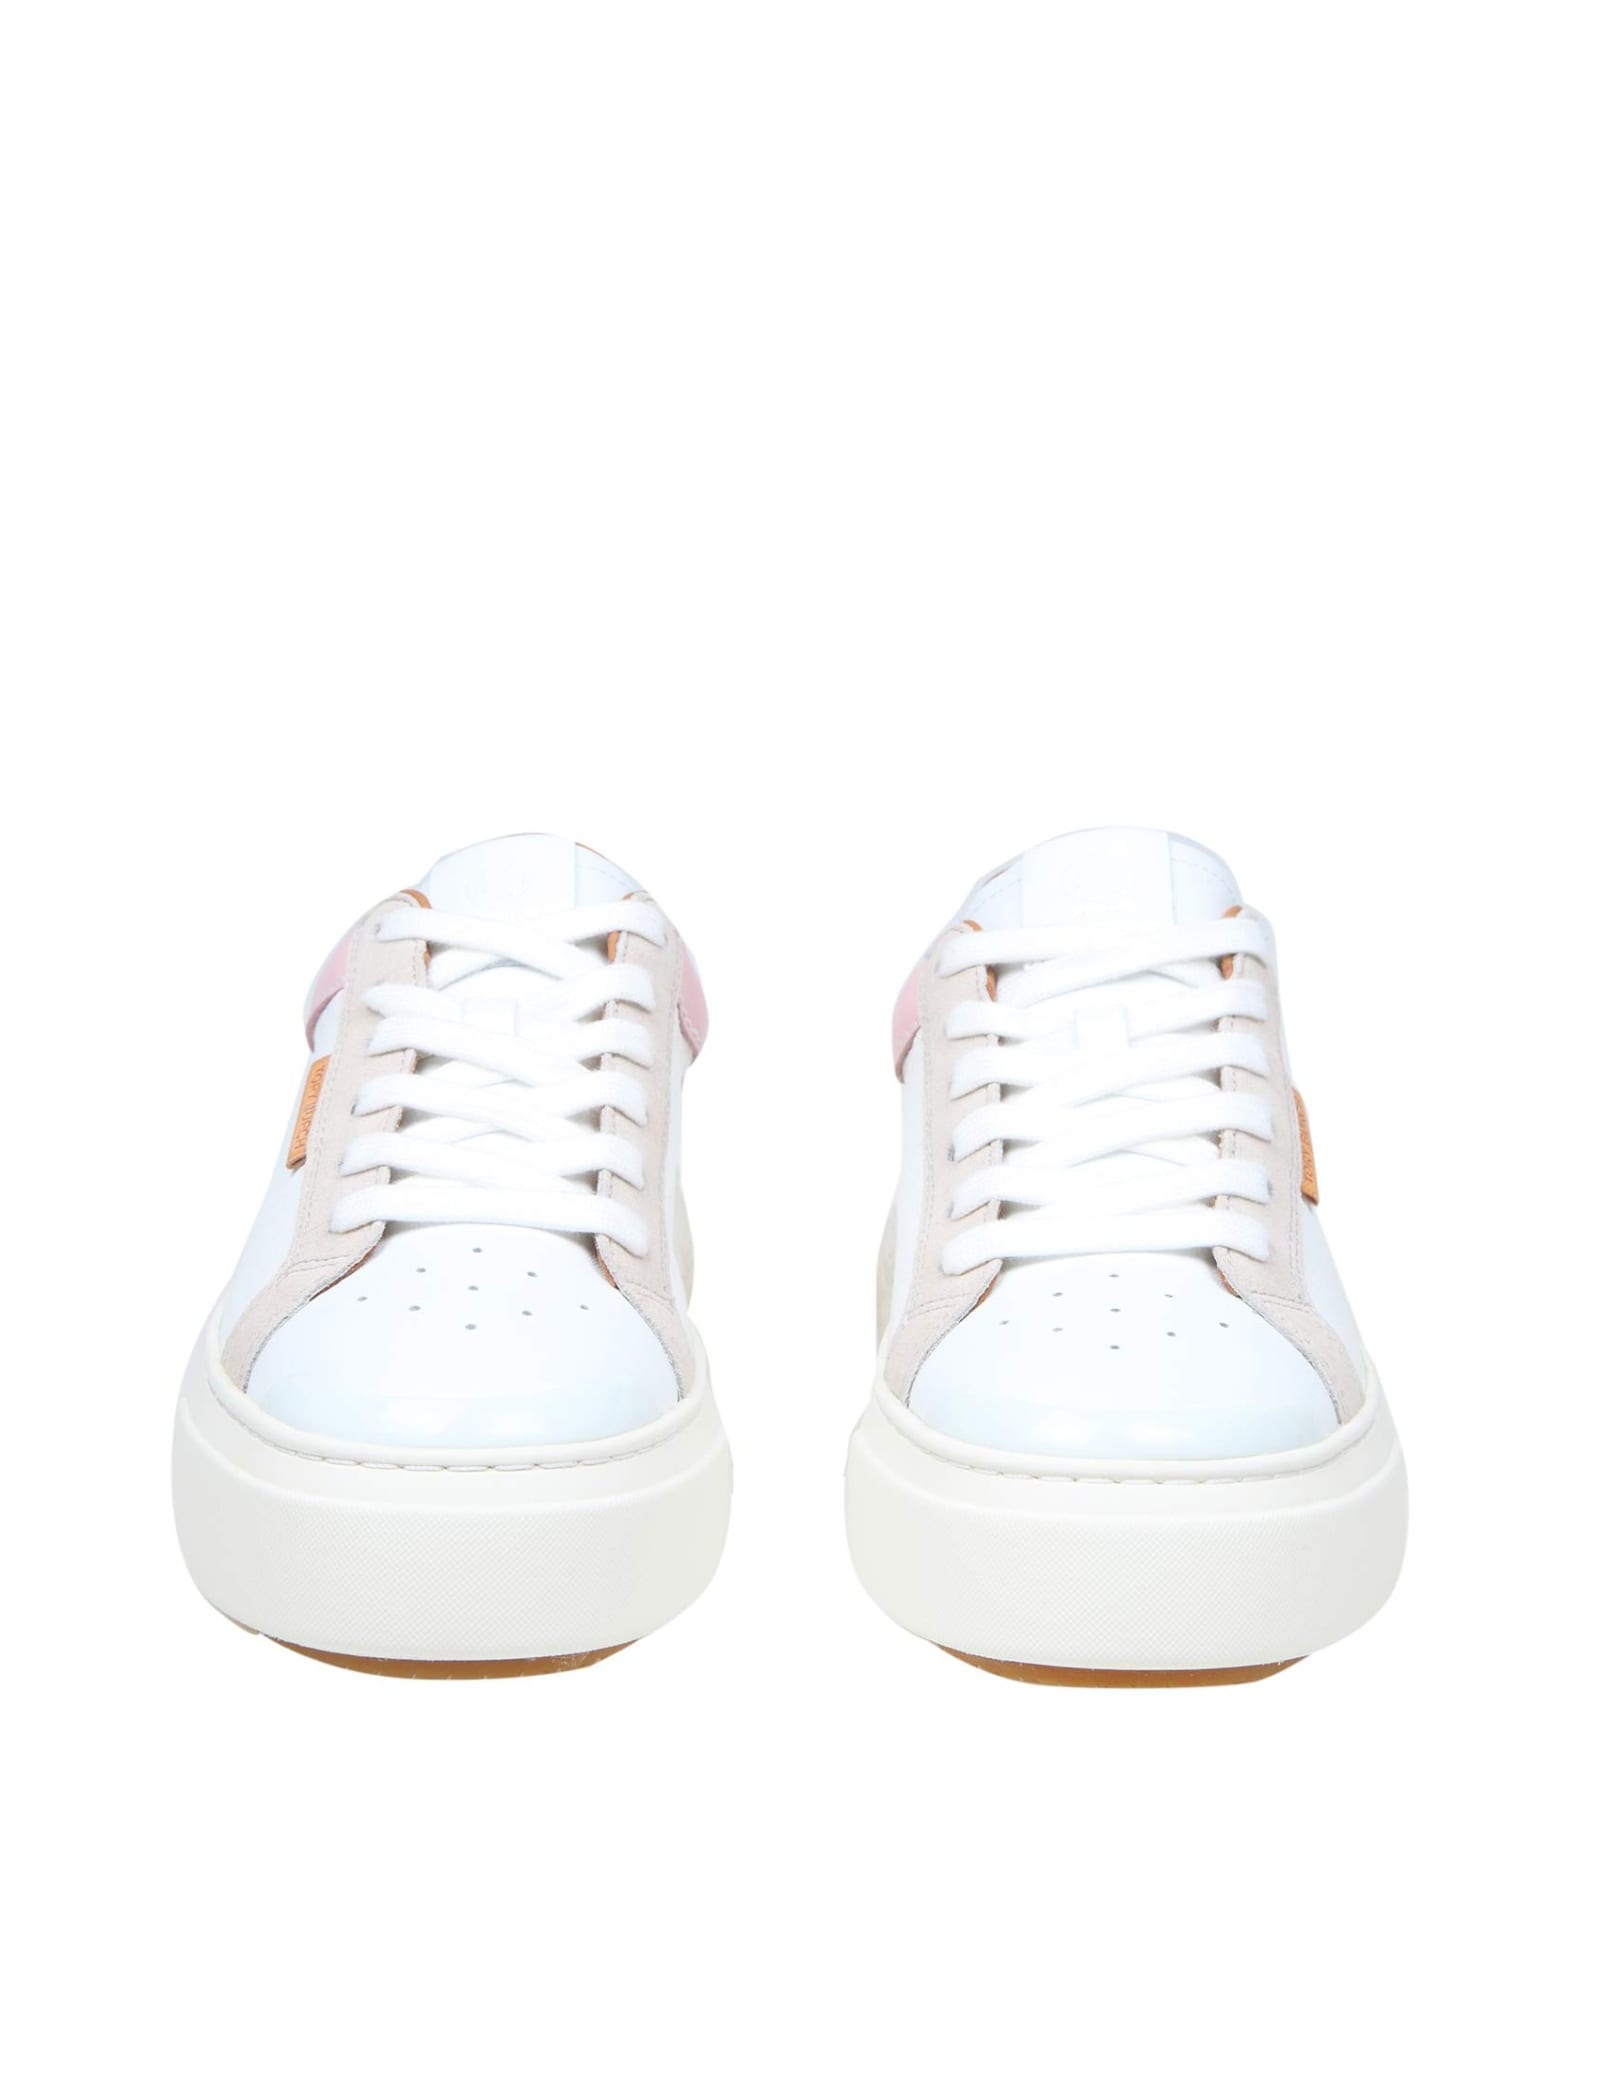 Shop Tory Burch Ladybug Sneakers In White And Pink Leather In White/rose